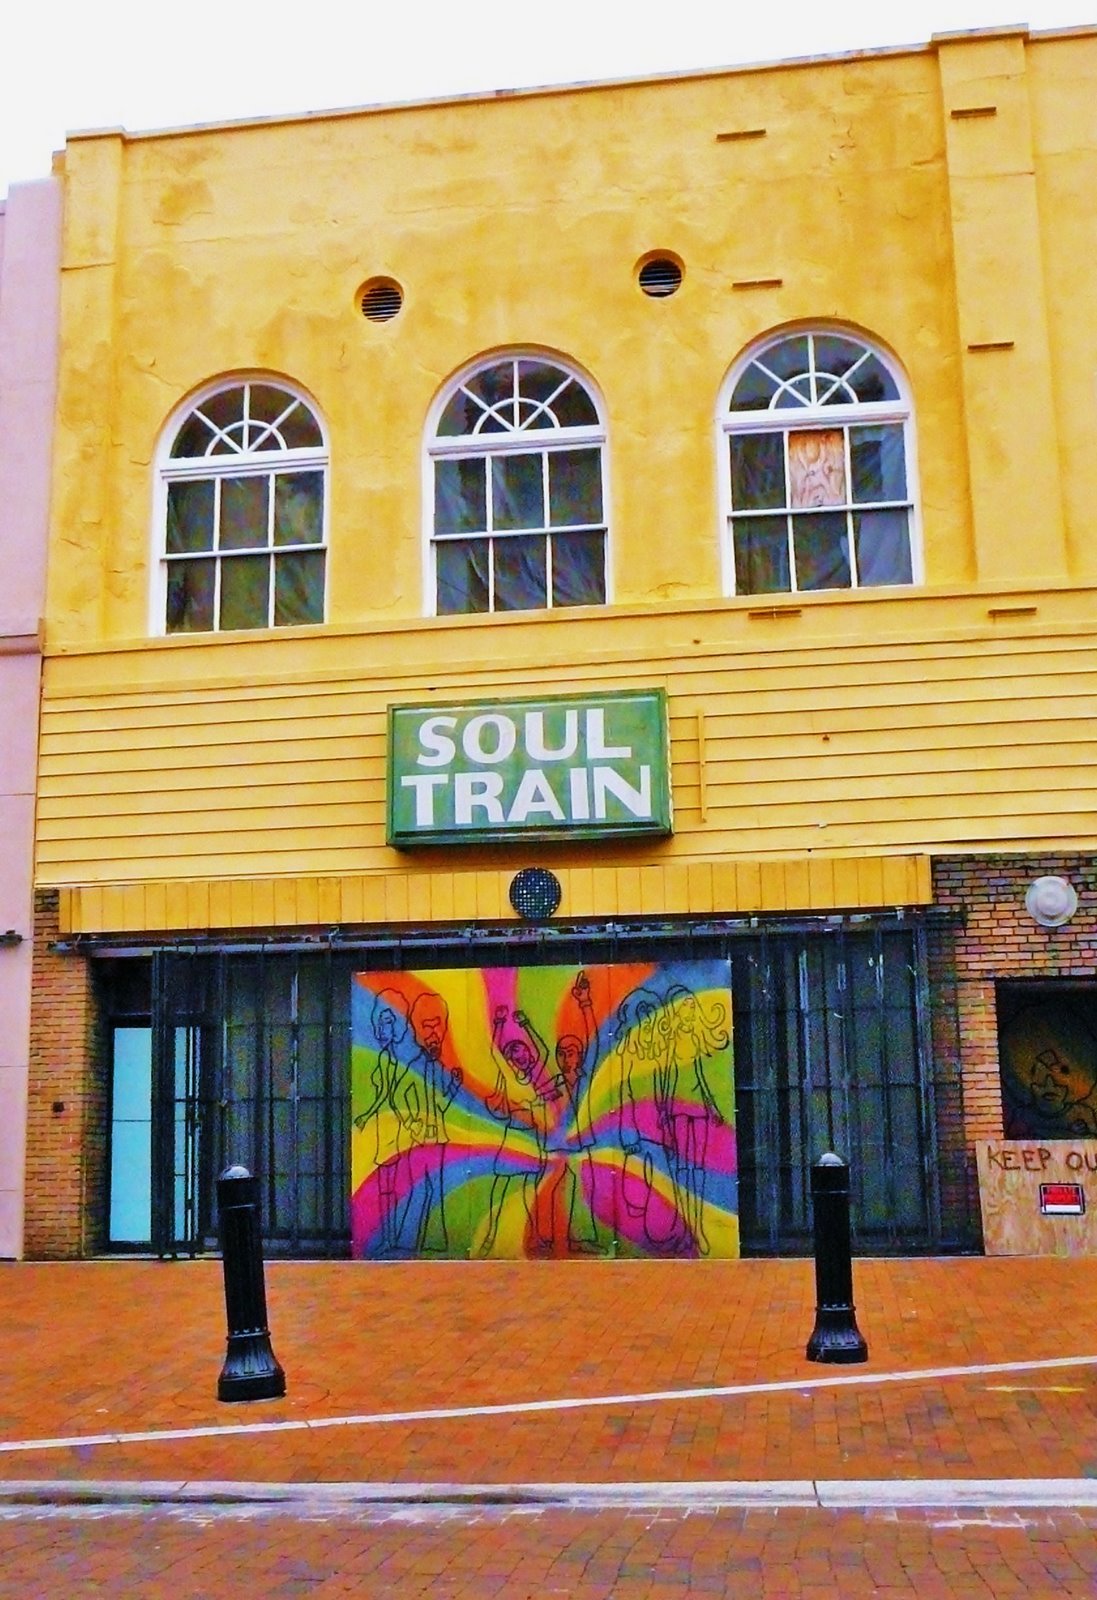 [Downtown+Tampa+SOUL+TRAIN+signage+051909+001.jpg]